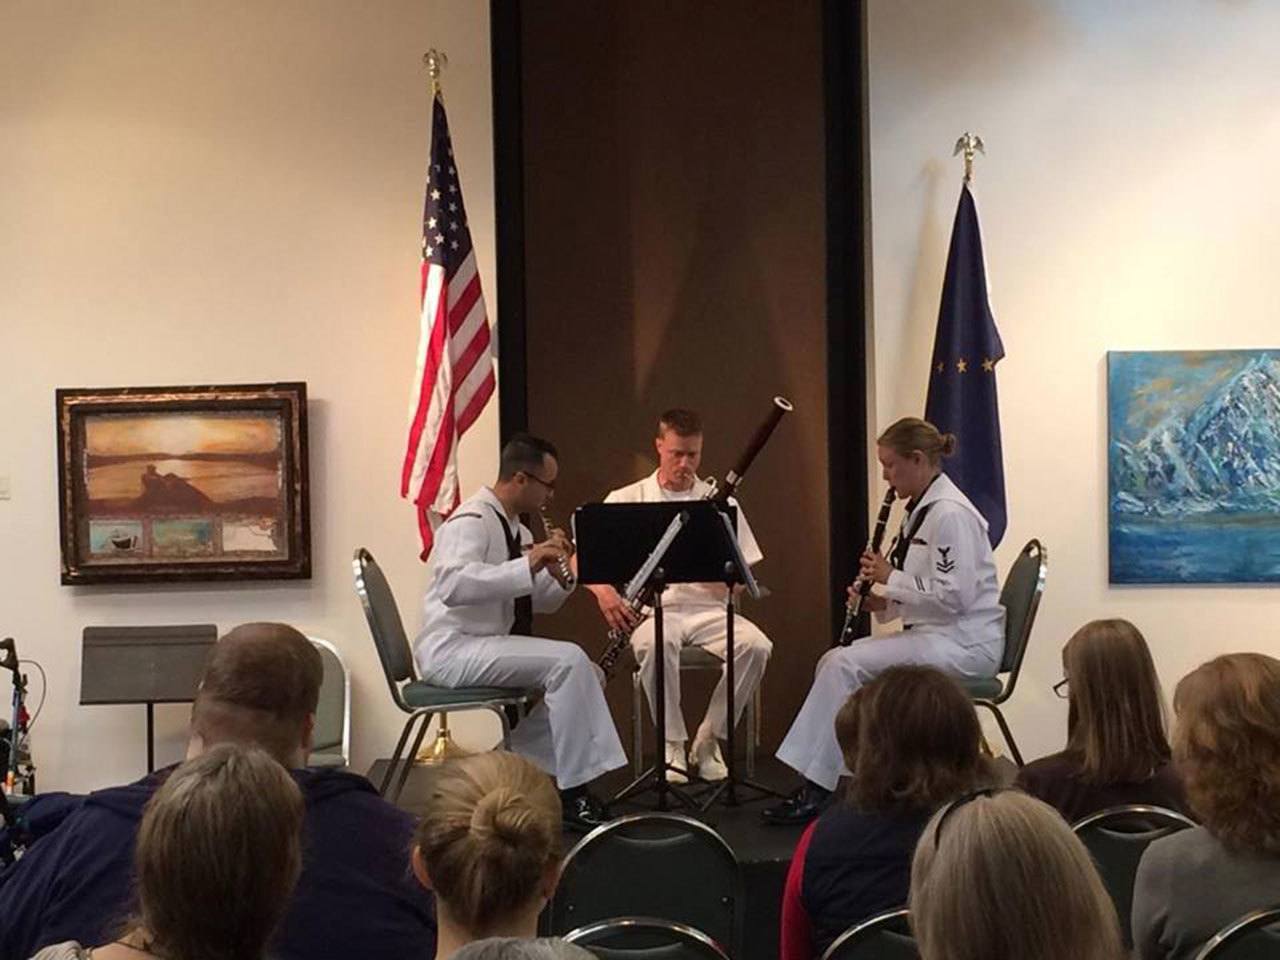 The woodwind trio Trident Winds — featuring Petty Officer First Class Edgardo Hernandez-Riveria on flute, Chief Petty Officer Sterling Strickler on bassoon and Petty Officer Second Class Emily Zizza on clarinet and — will lead off a concert in Port Angeles today.